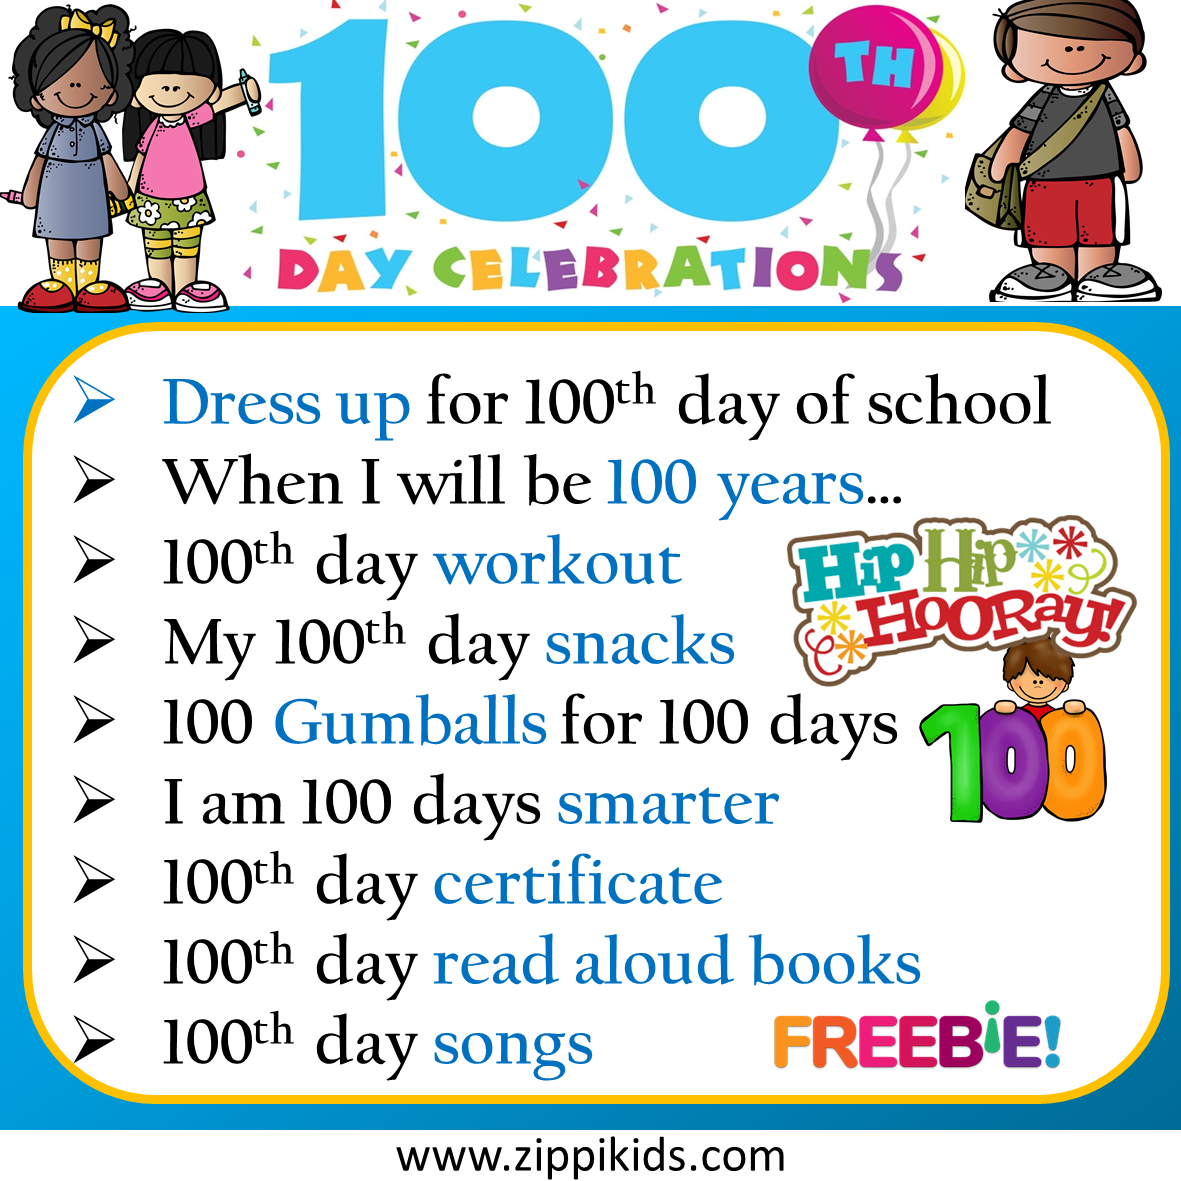 100th Day of School Celebrations - Google Slides/PowerPoint